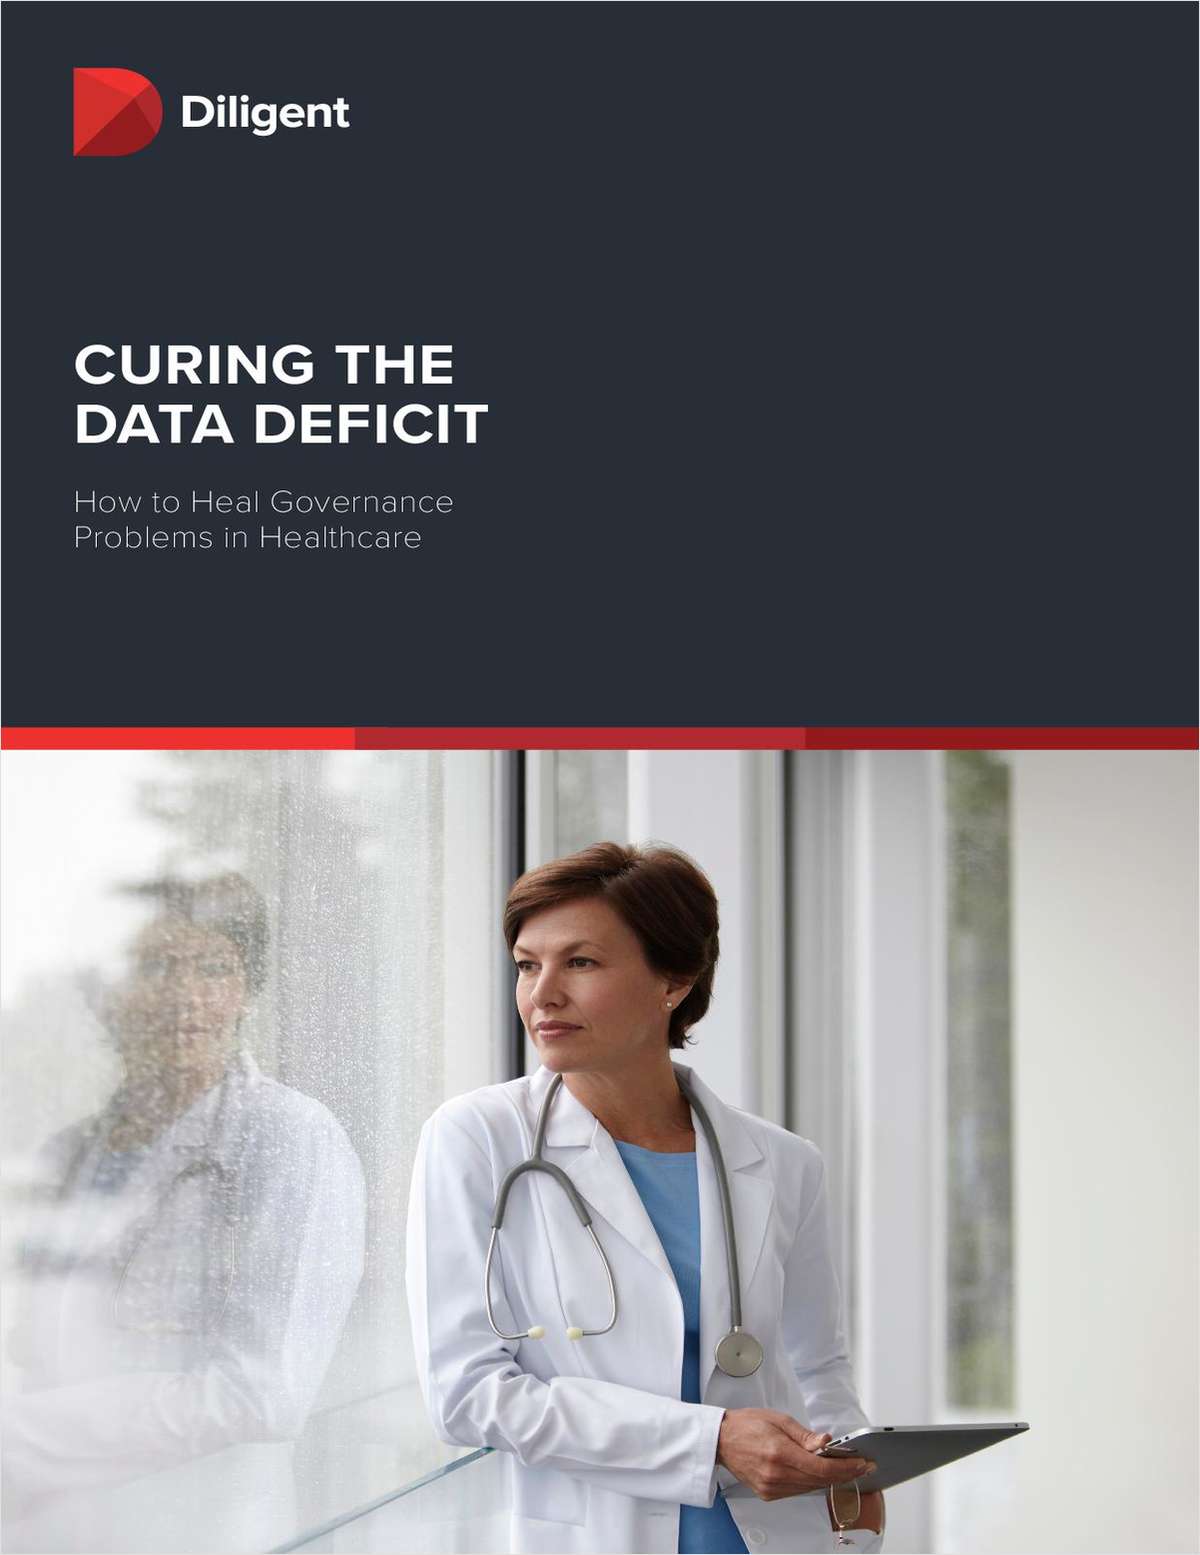 Curing the Data Deficit: How to Heal Governance Problems in Healthcare